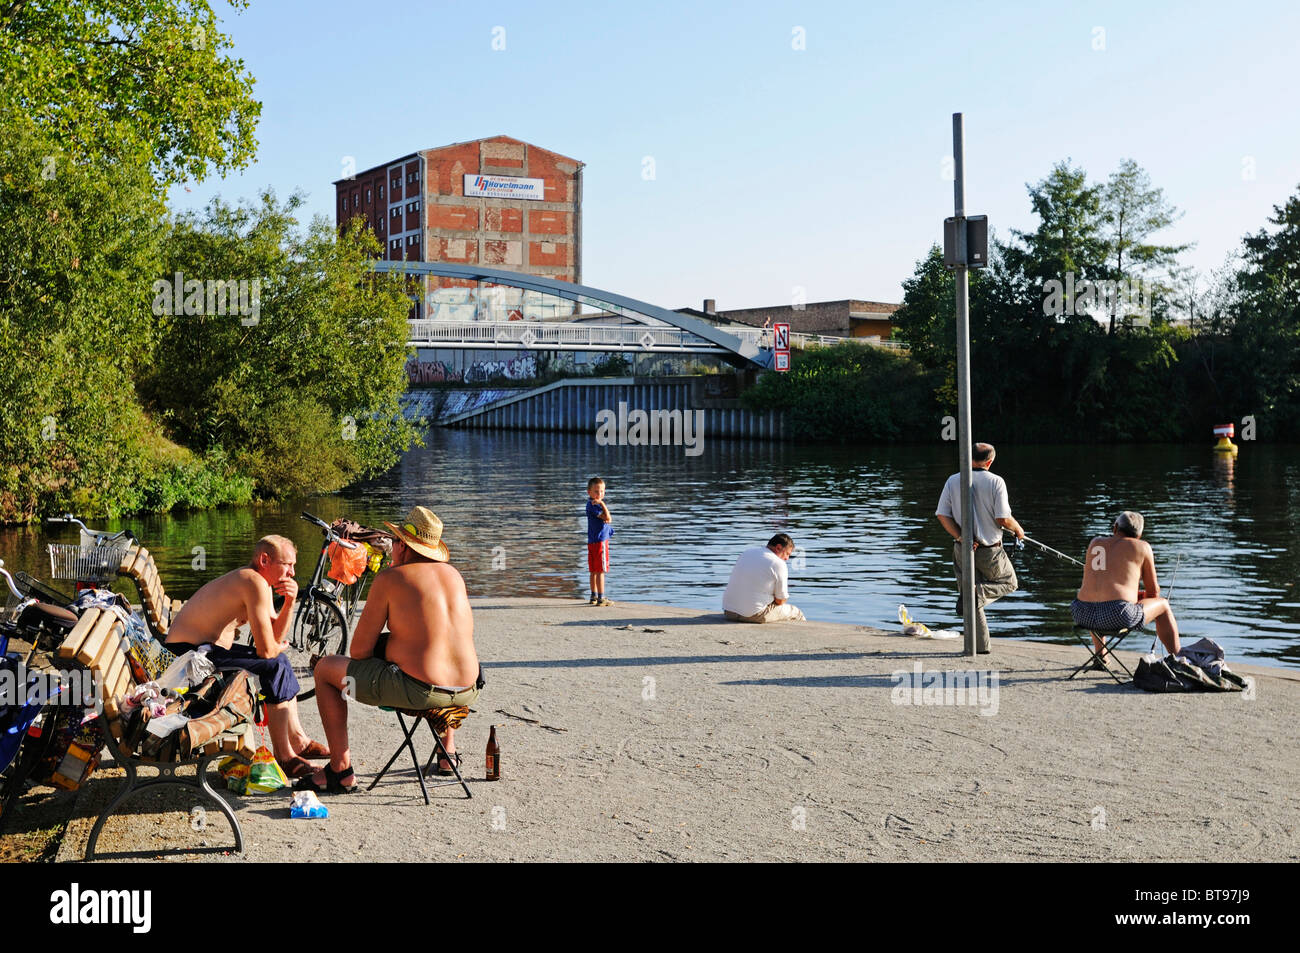 Anglers in summer at the Berlin-Spandau Schifffahrtskanal channel, once the border with East Germany, Berlin, Germany, Europe Stock Photo